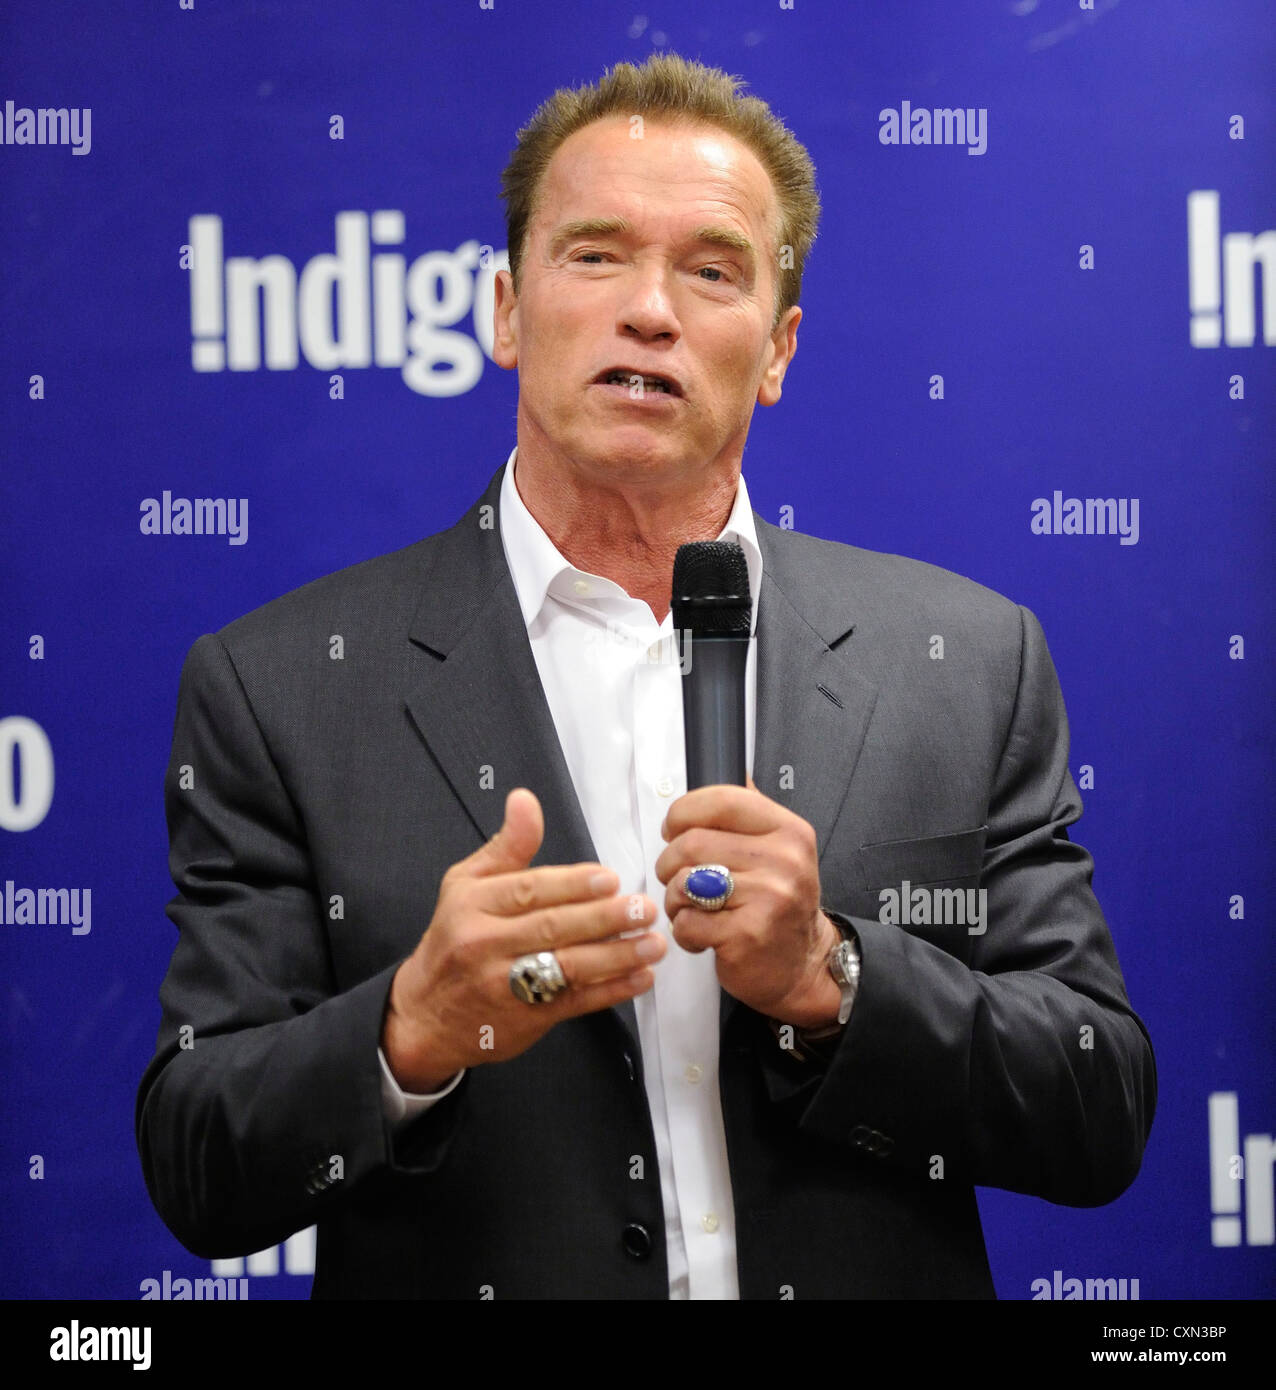 Actor and former California Governor Arnold Schwarzenegger stops at Toronto's Indigo bookstore at Manulife Centre promoting his Stock Photo